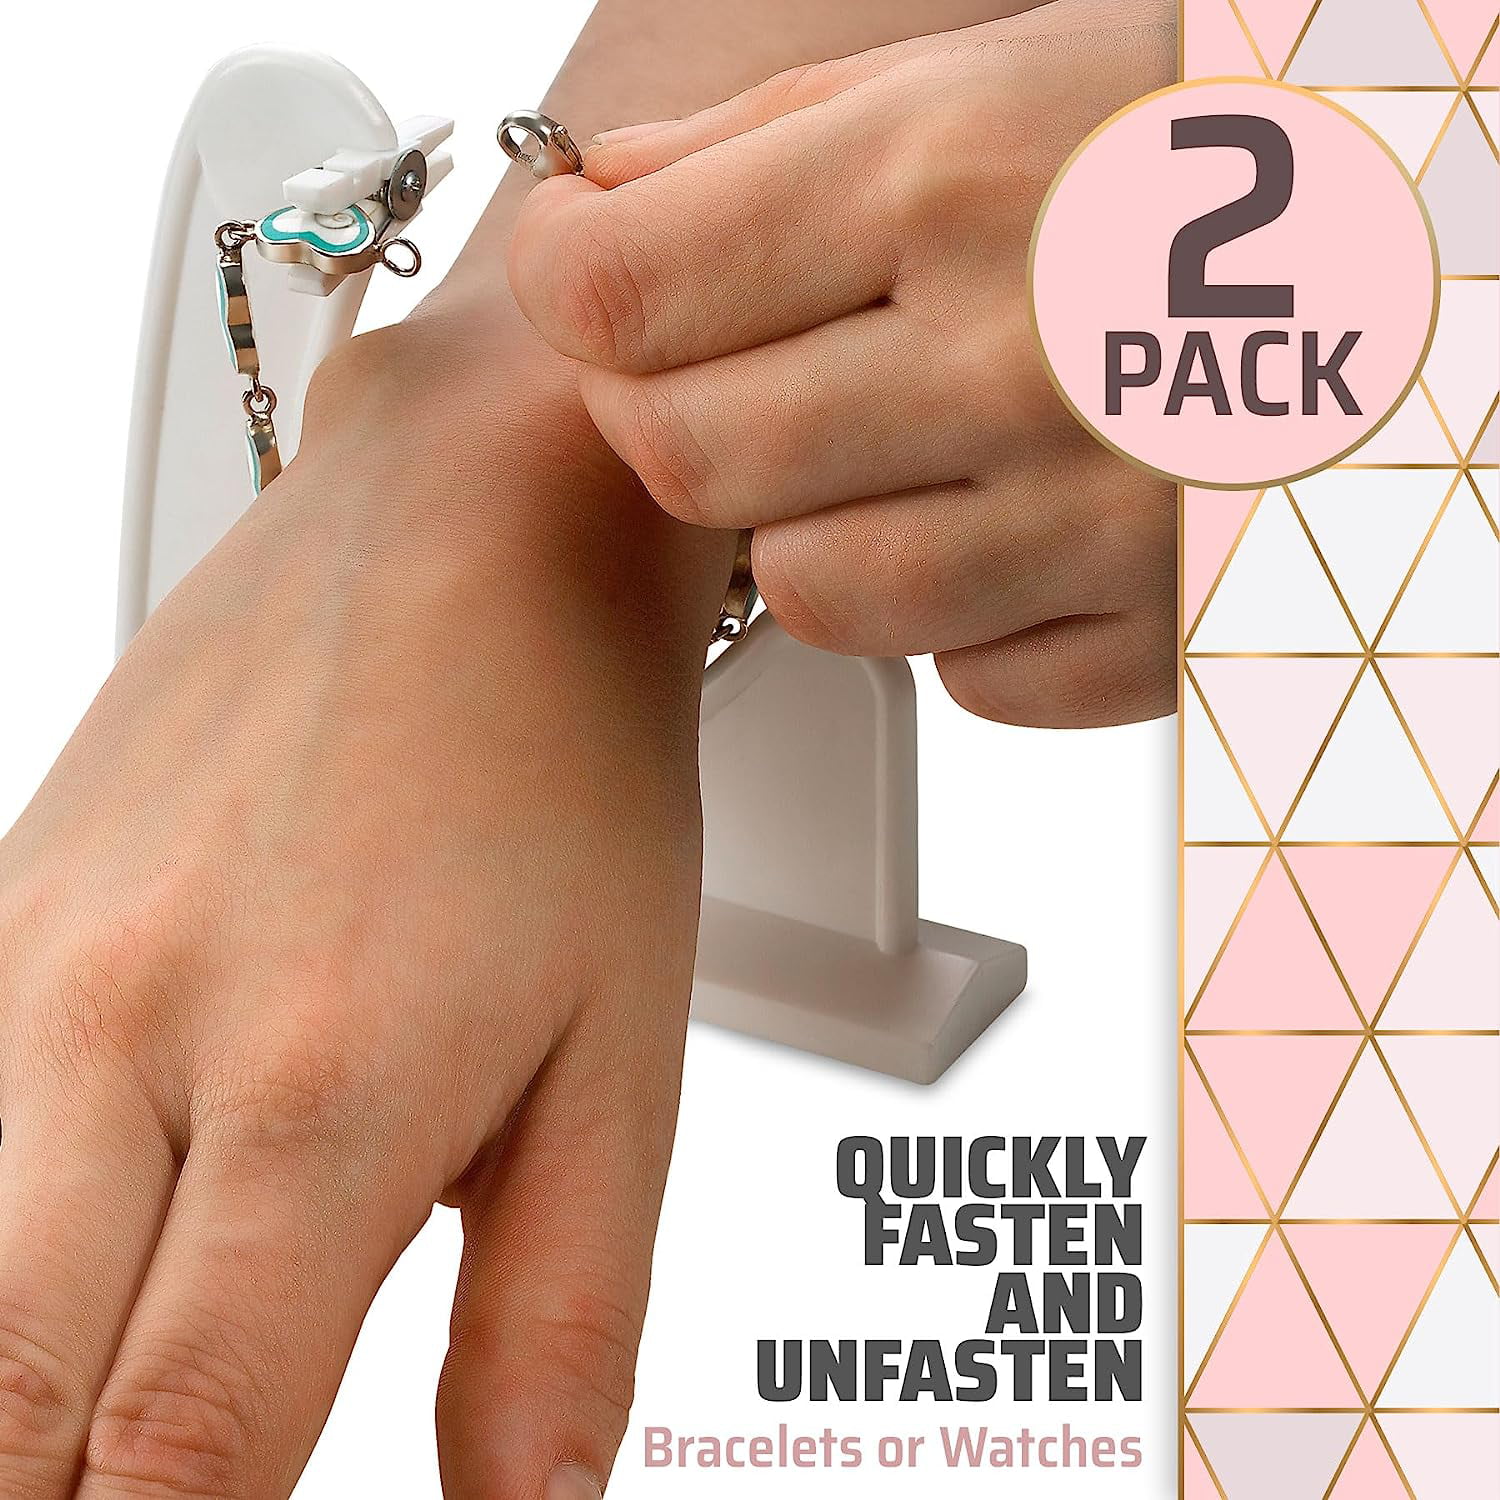  Medca Bracelet Buddy- Jewelry Helper Fastening Aid to Quickly  Fasten and Unfasten Bracelets or Watches : Health & Household